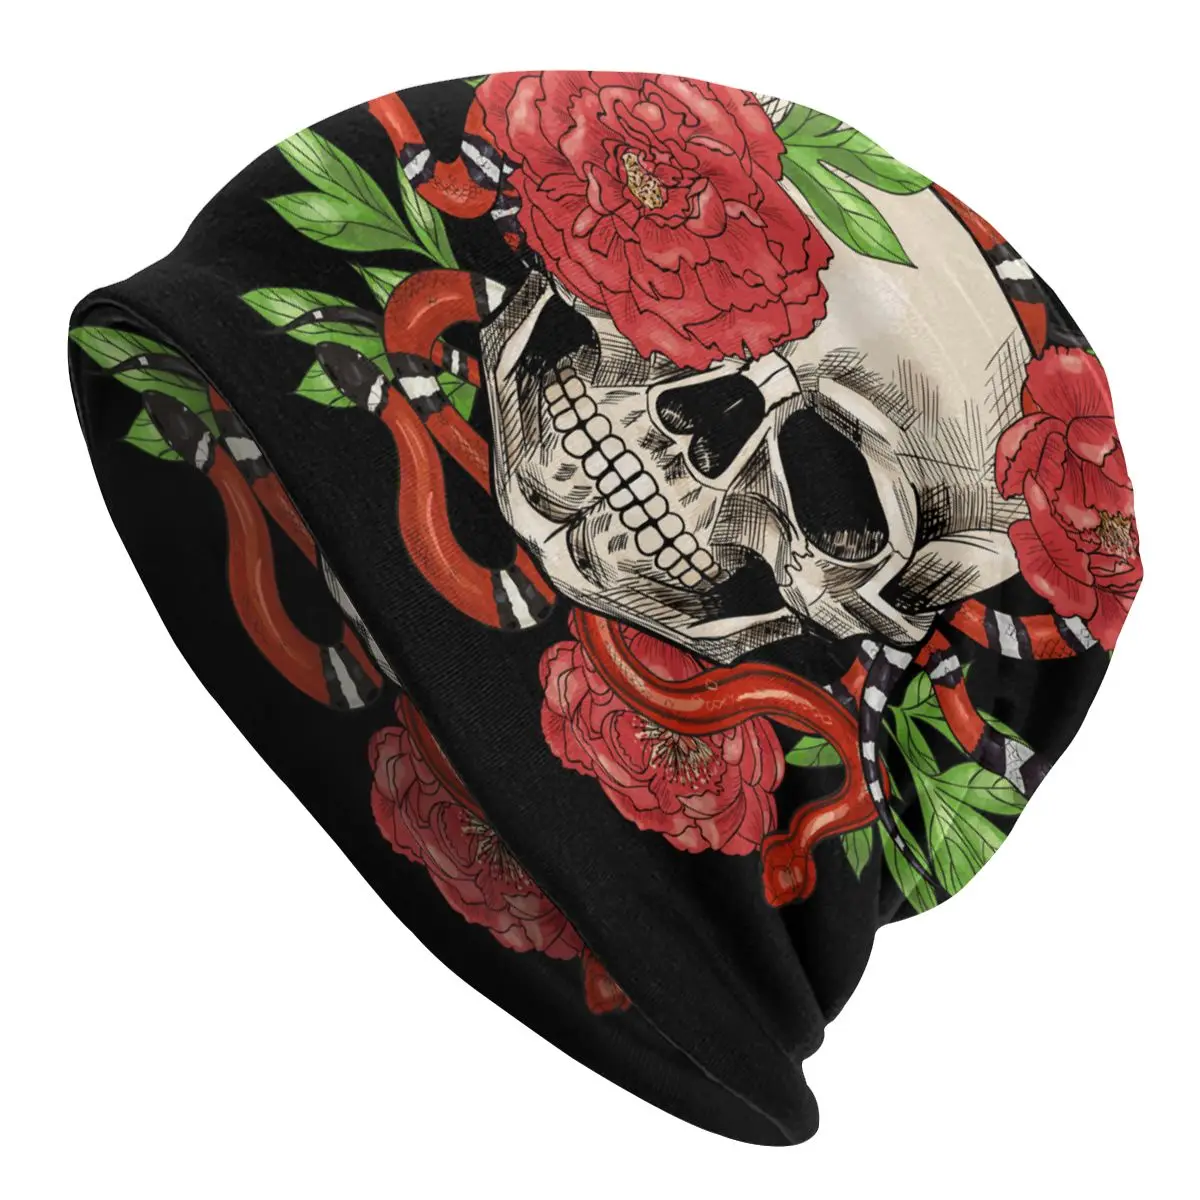 Skulls With Snakes And Peonies Men's Beanies for Women Outdoor Bonnet Hats Unisex Knitted Hat Hip Hop Cap